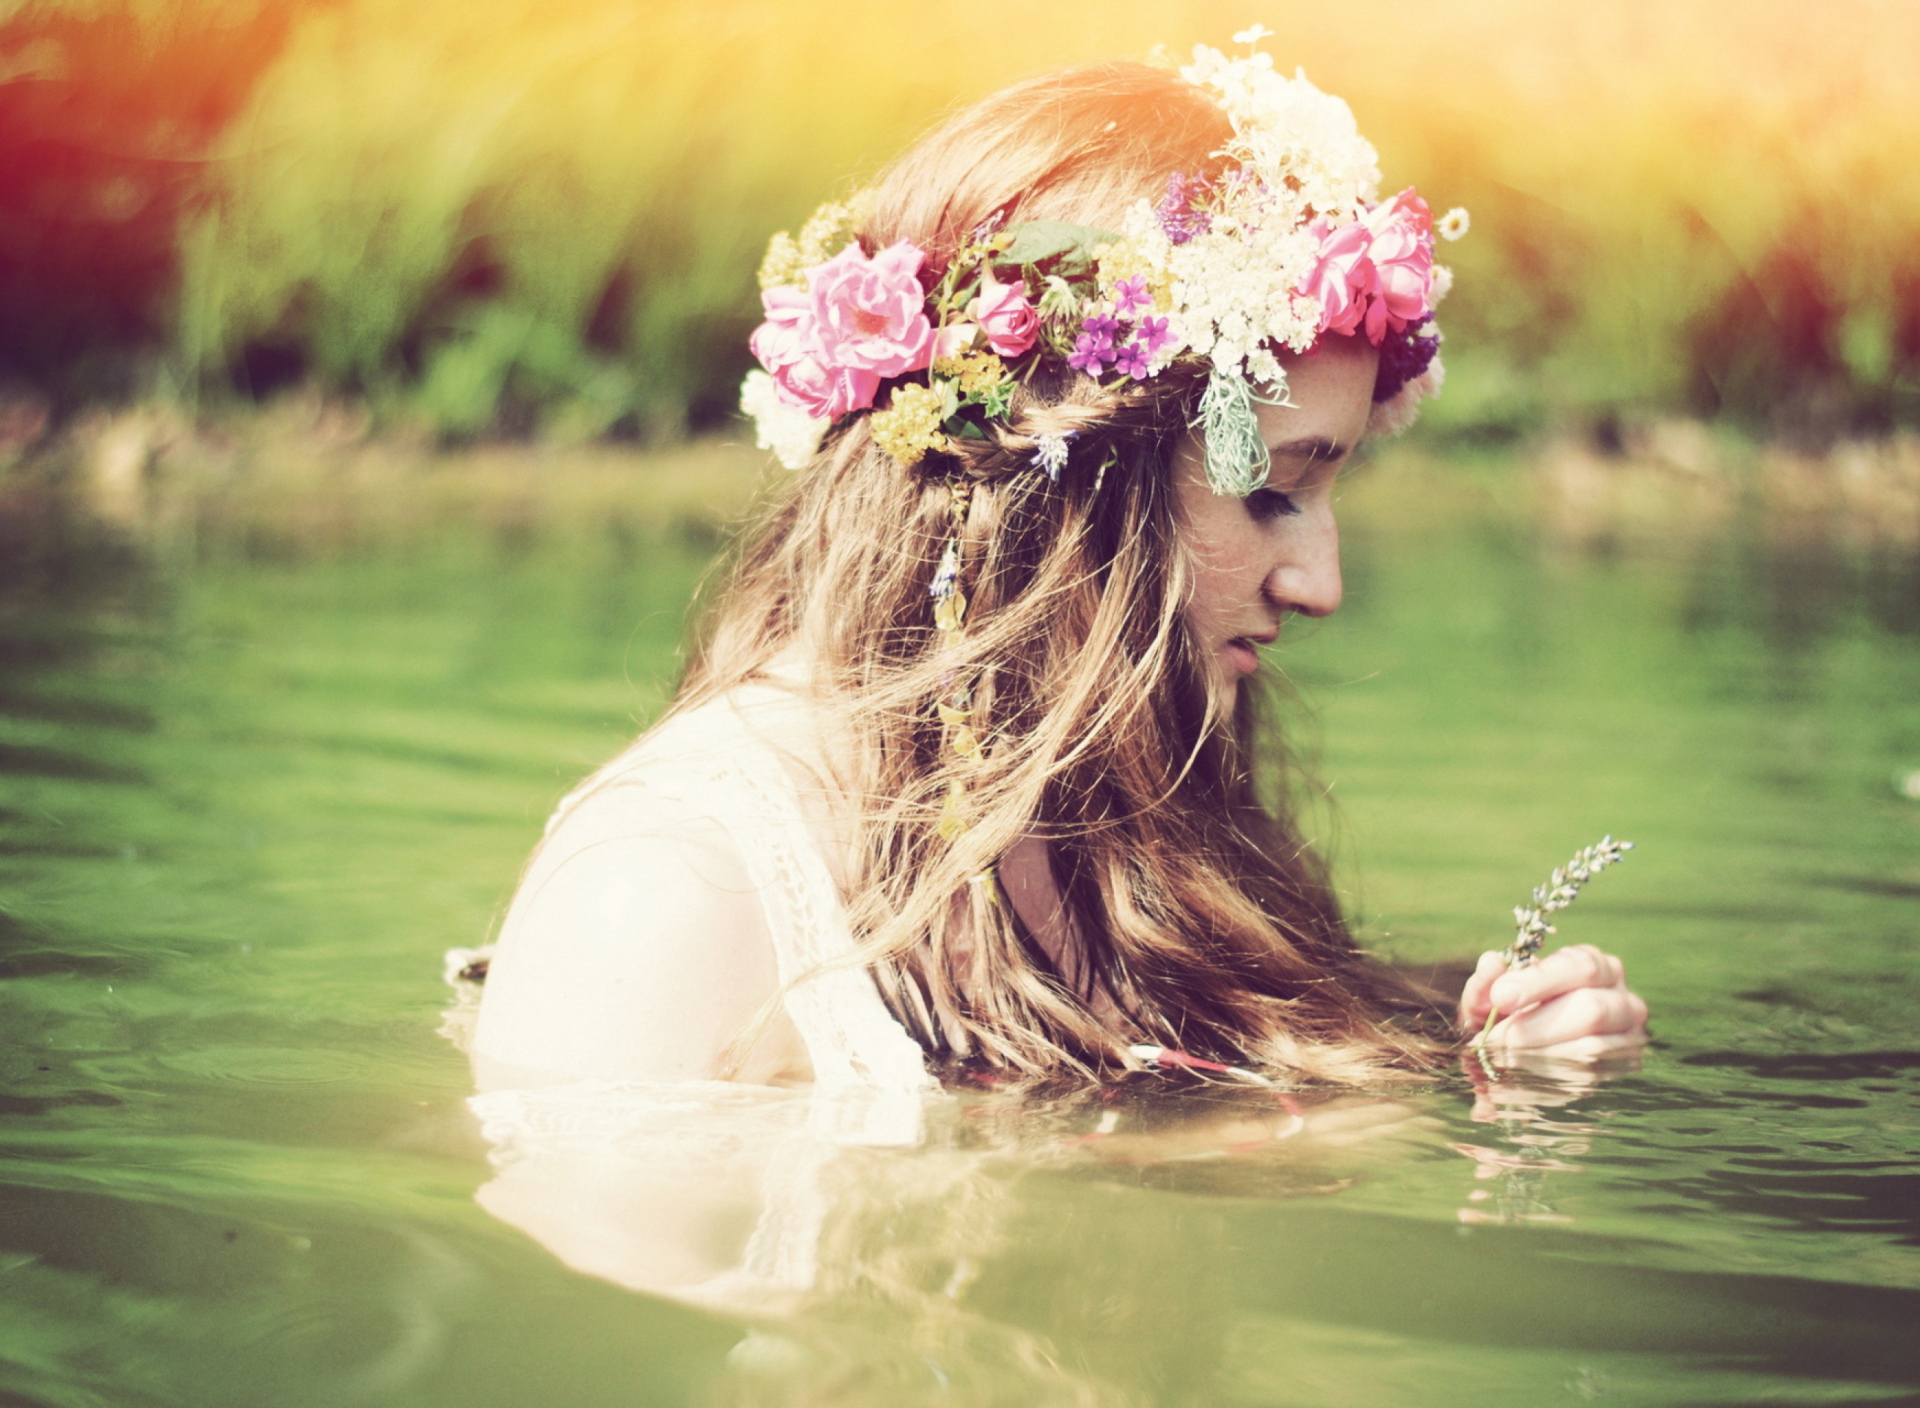 Girl With Flower Crown wallpaper 1920x1408